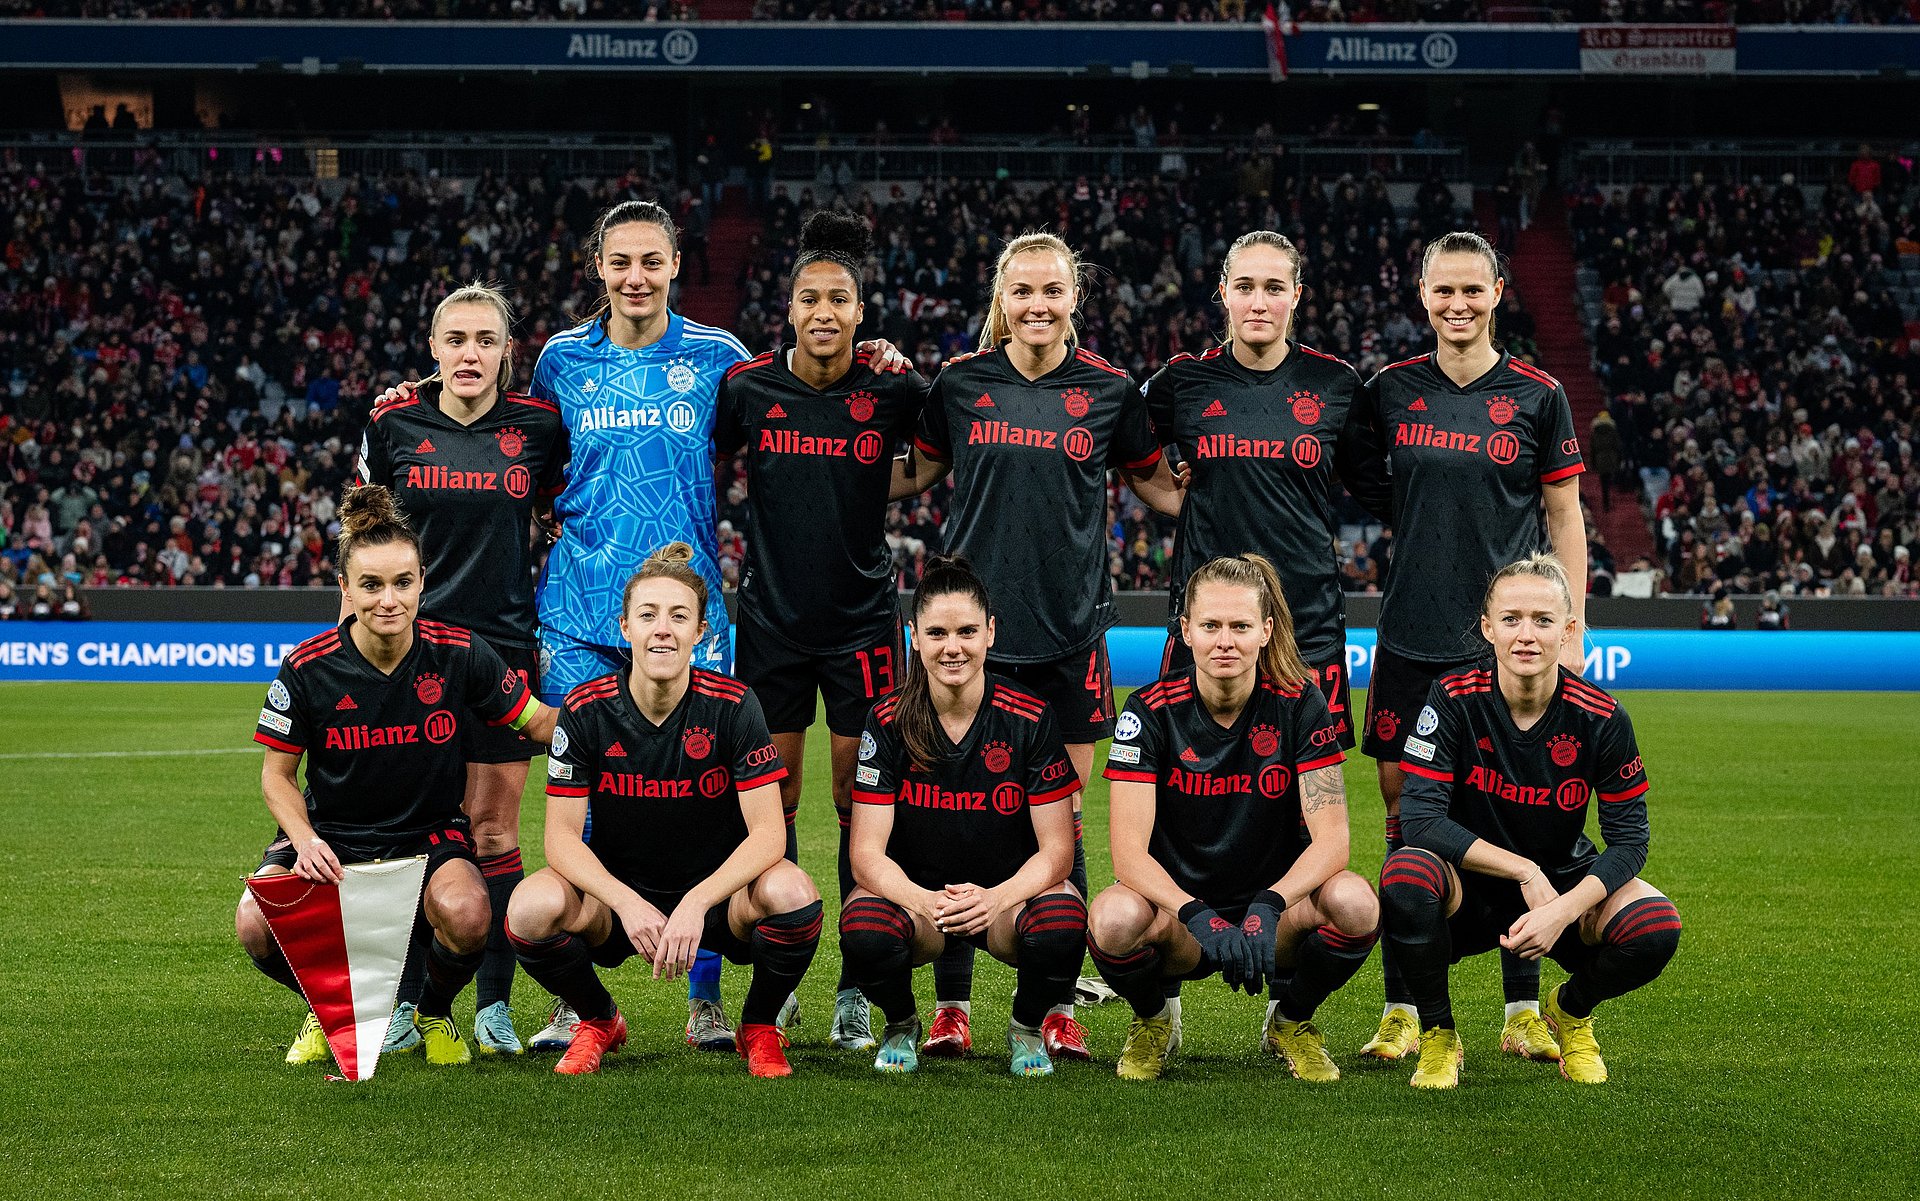 Group picture of the FC Bayern Munich women's football first team.